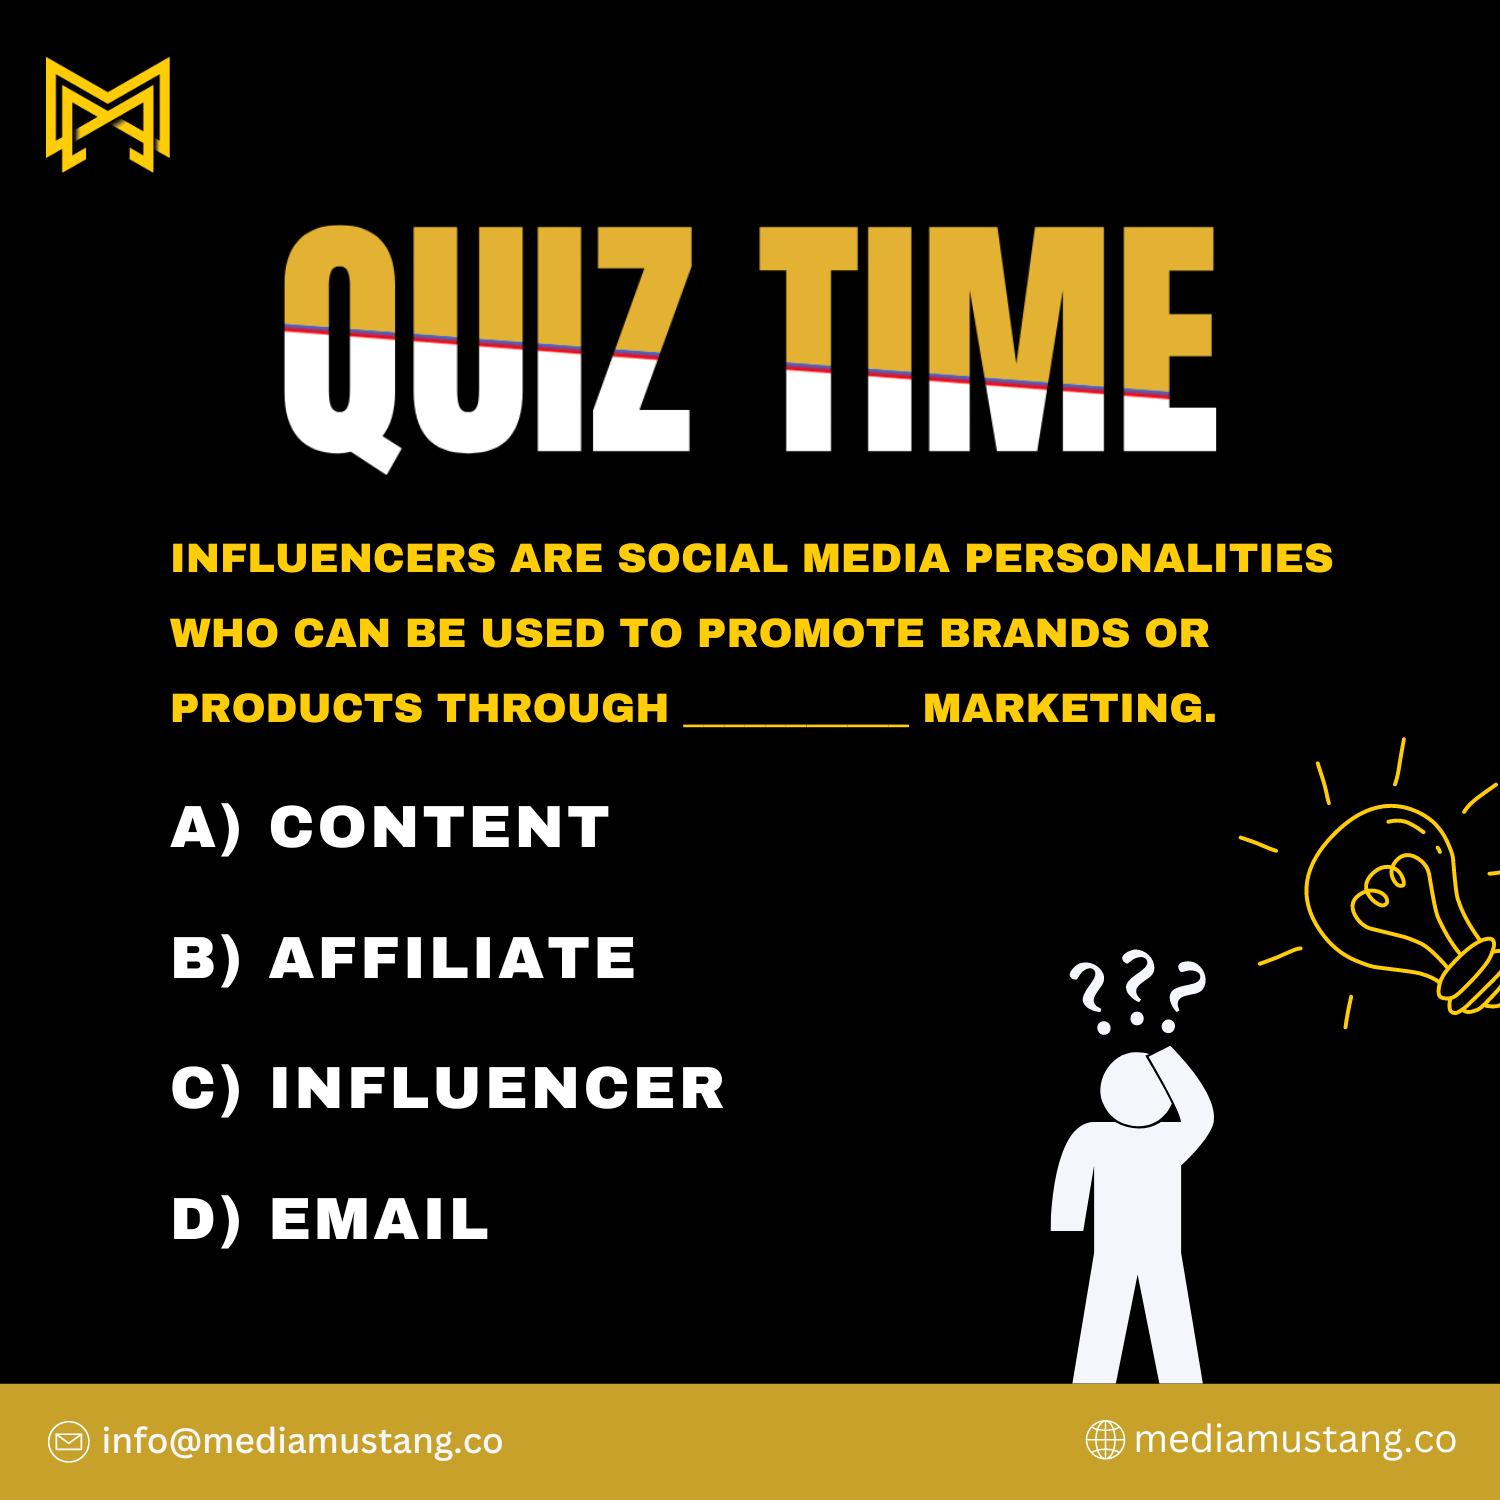 Quiz Time! Test your marketing knowledge